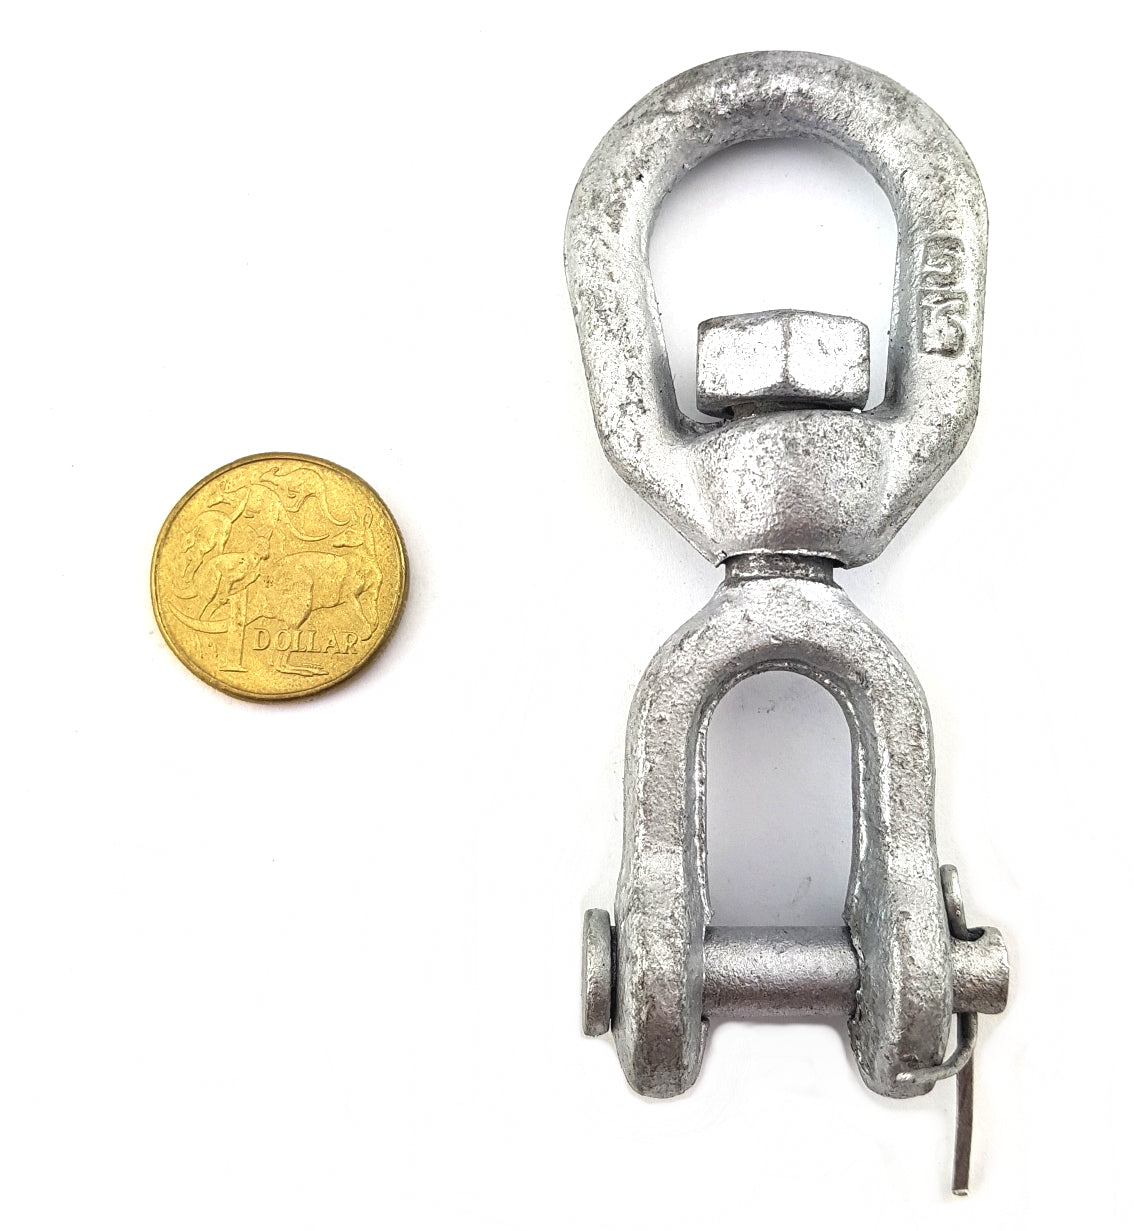 Galvanised steel chain swivel with linchpin opening, size 8mm.